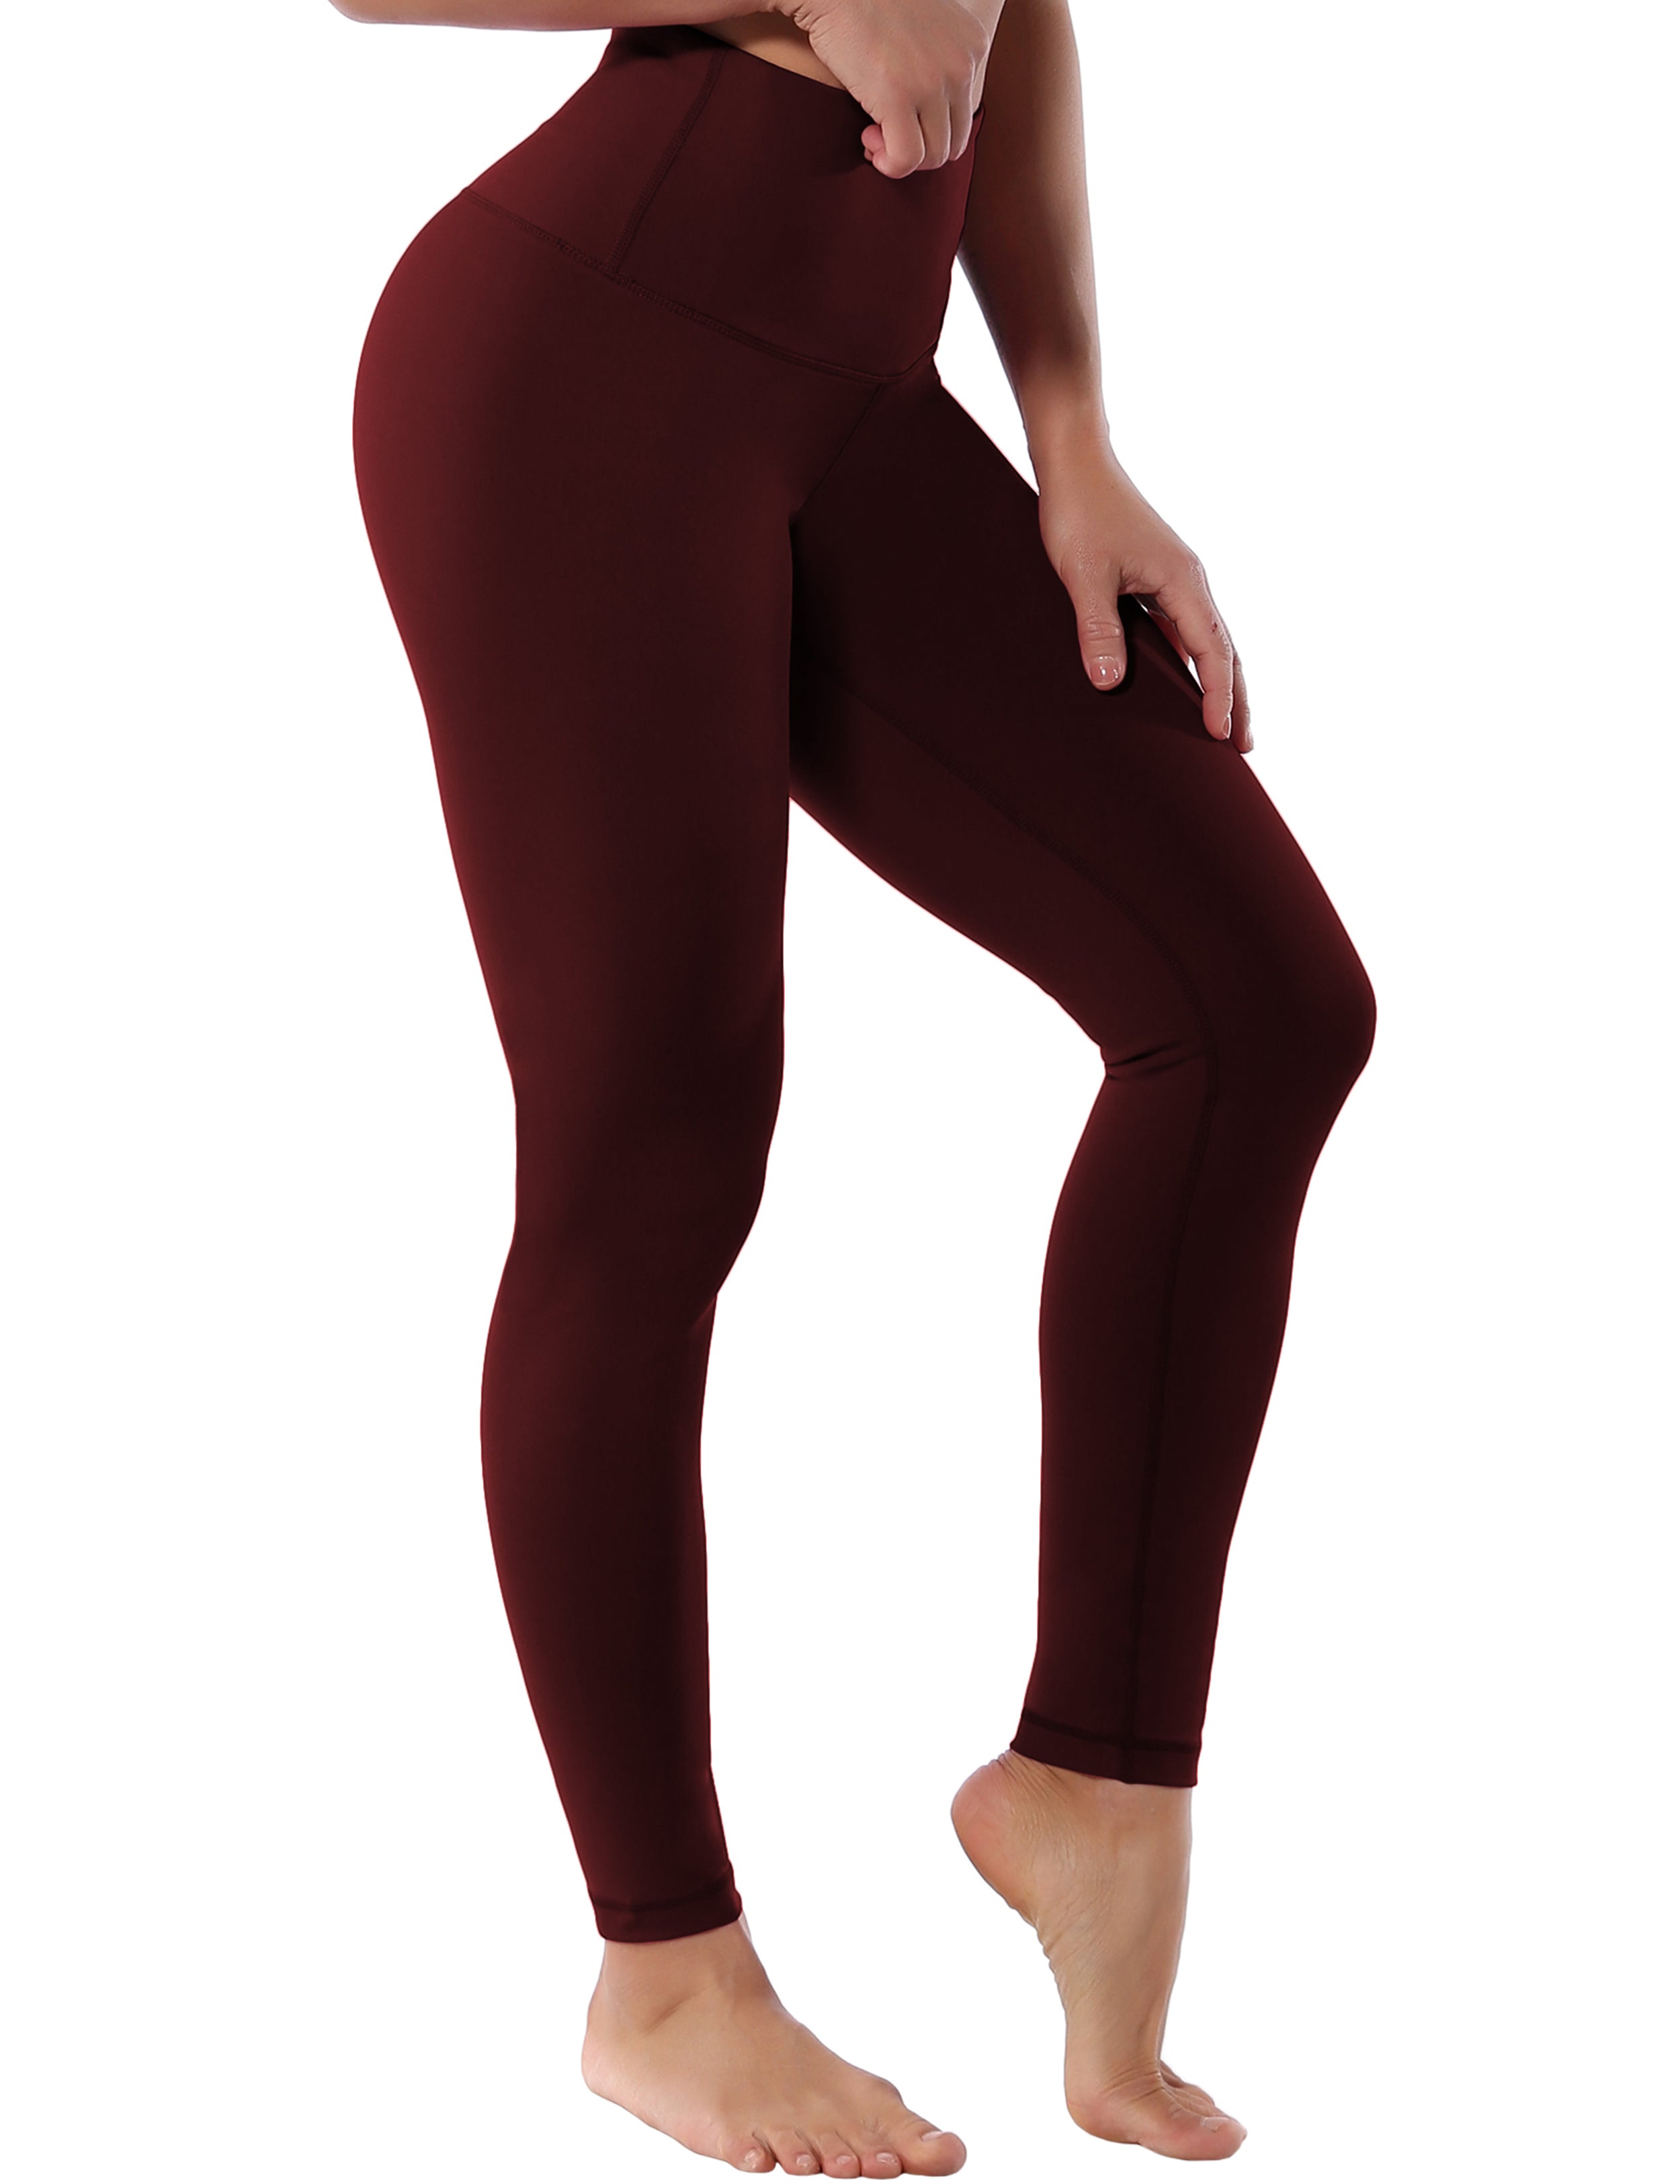 High Waist Yoga Pants cherryred 75%Nylon/25%Spandex Fabric doesn't attract lint easily 4-way stretch No see-through Moisture-wicking Tummy control Inner pocket Four lengths